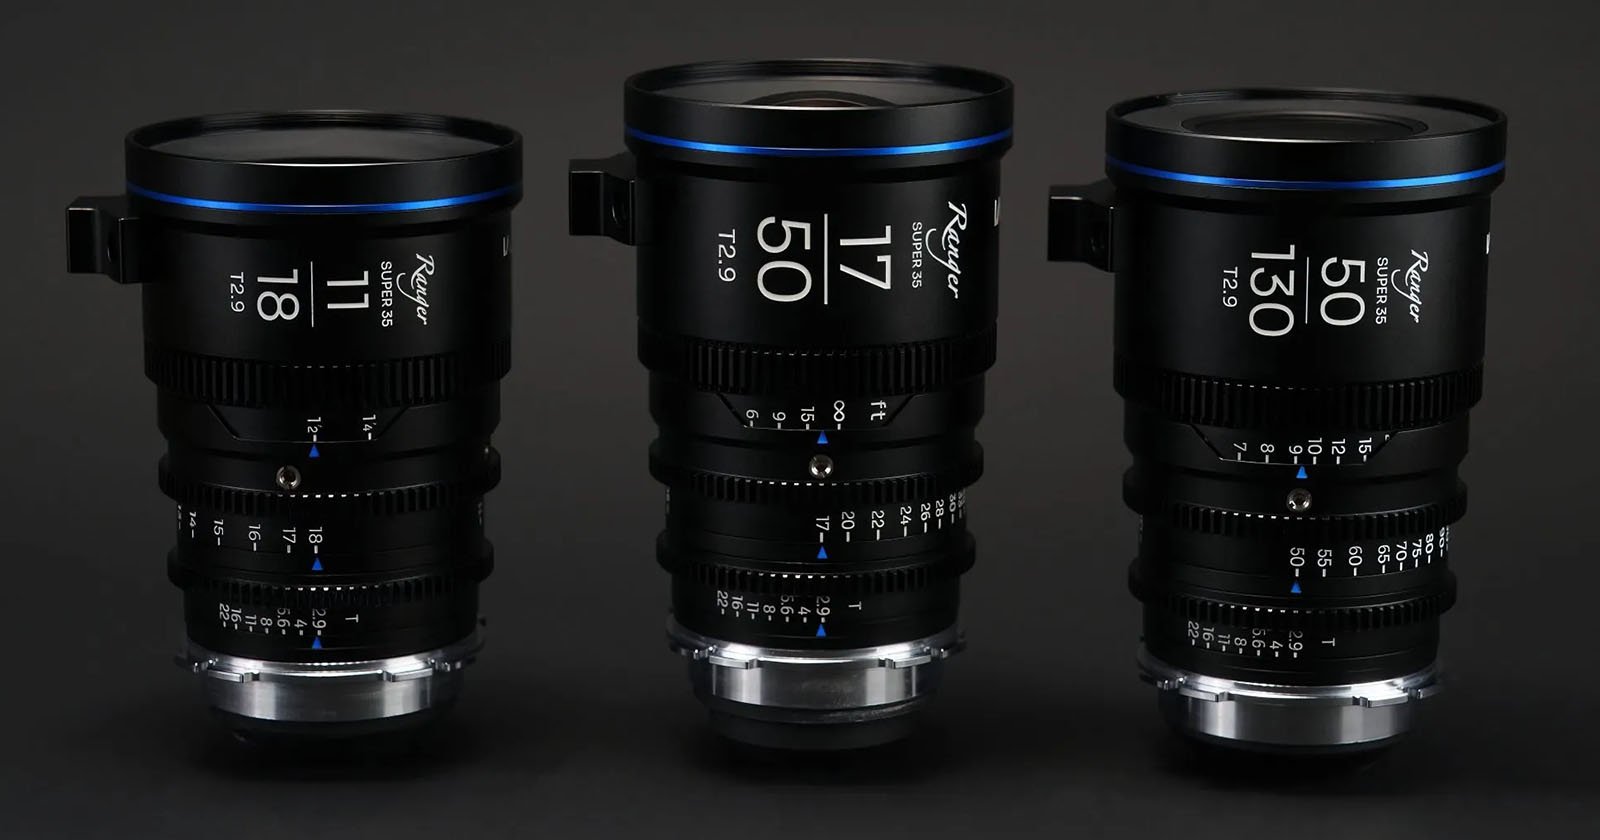 Three professional cinema lenses aligned side by side, with detailed focus and aperture scales visible on a dark background.